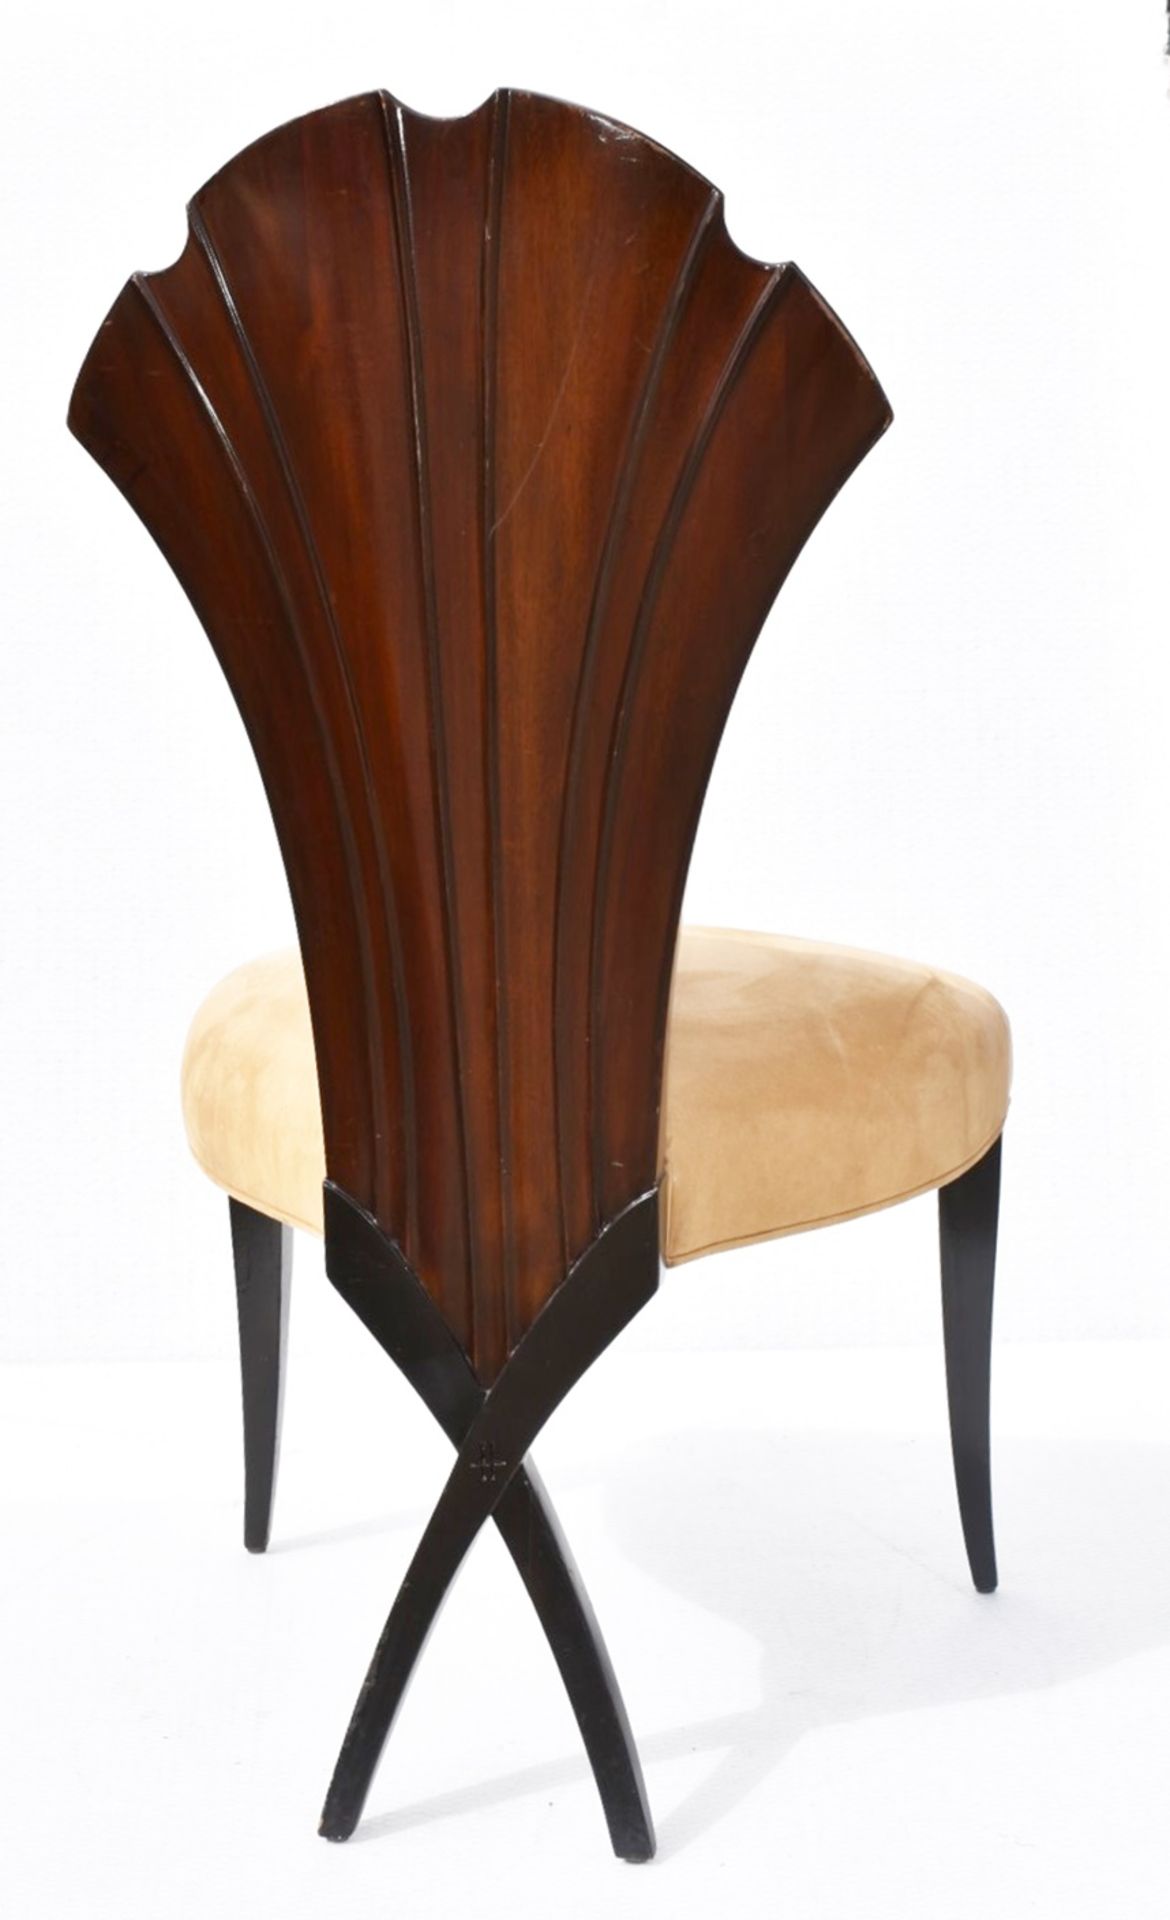 6 x CHRISTOPHER GUY 'La Croisette' Luxury Hand-carved Solid Mahogany Designer Dining Chairs - - Image 5 of 11